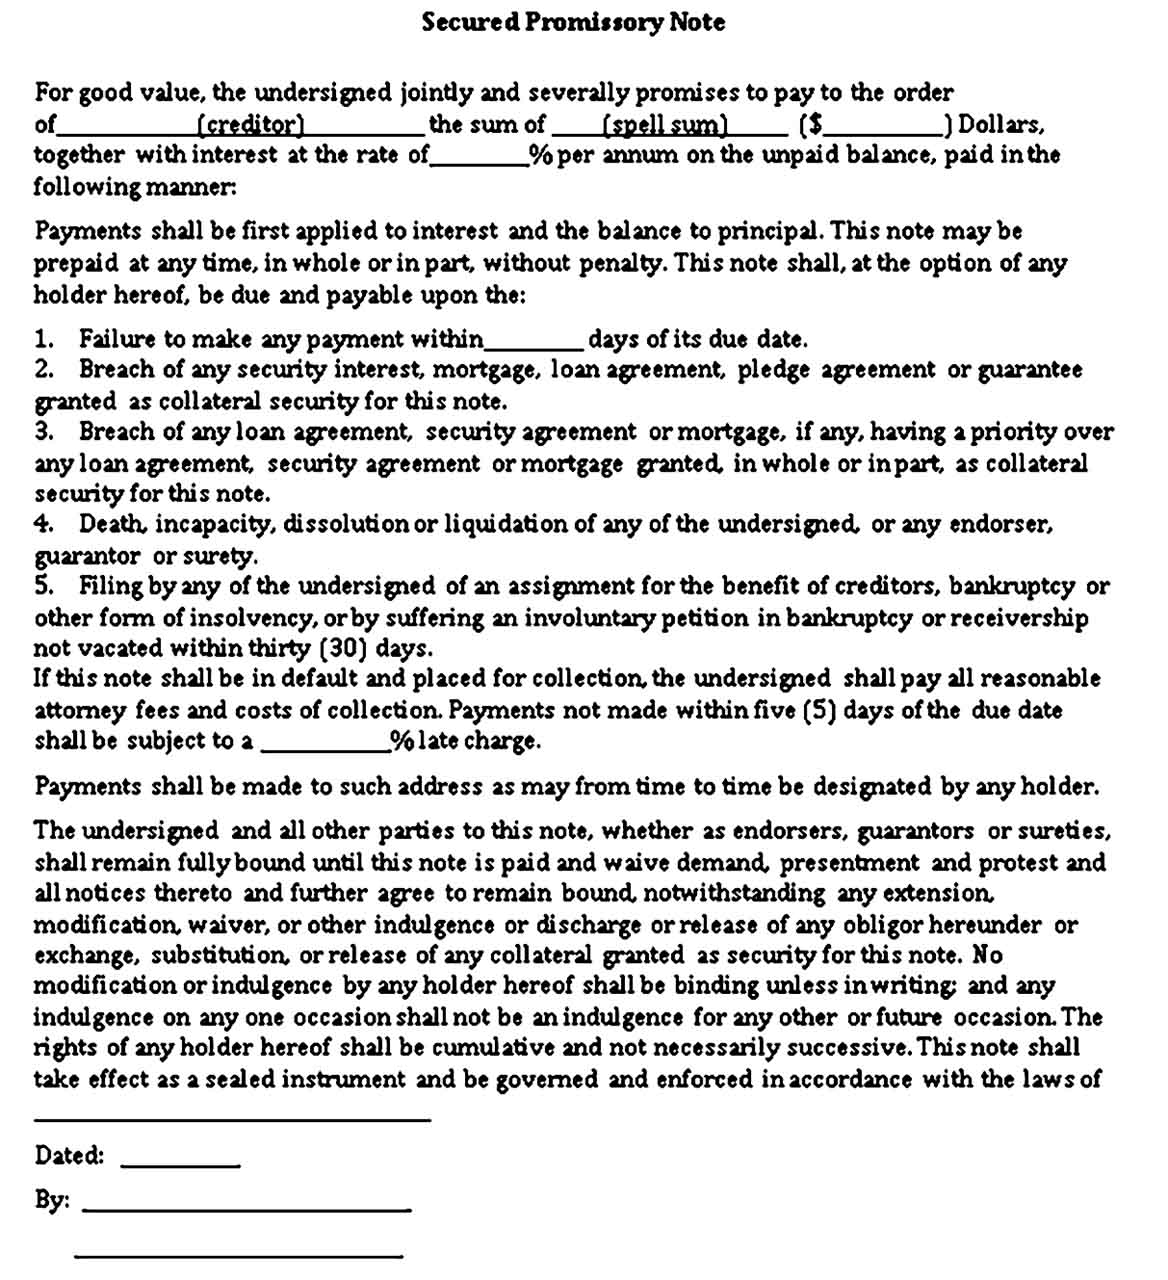 Sample Secured Promissory Note